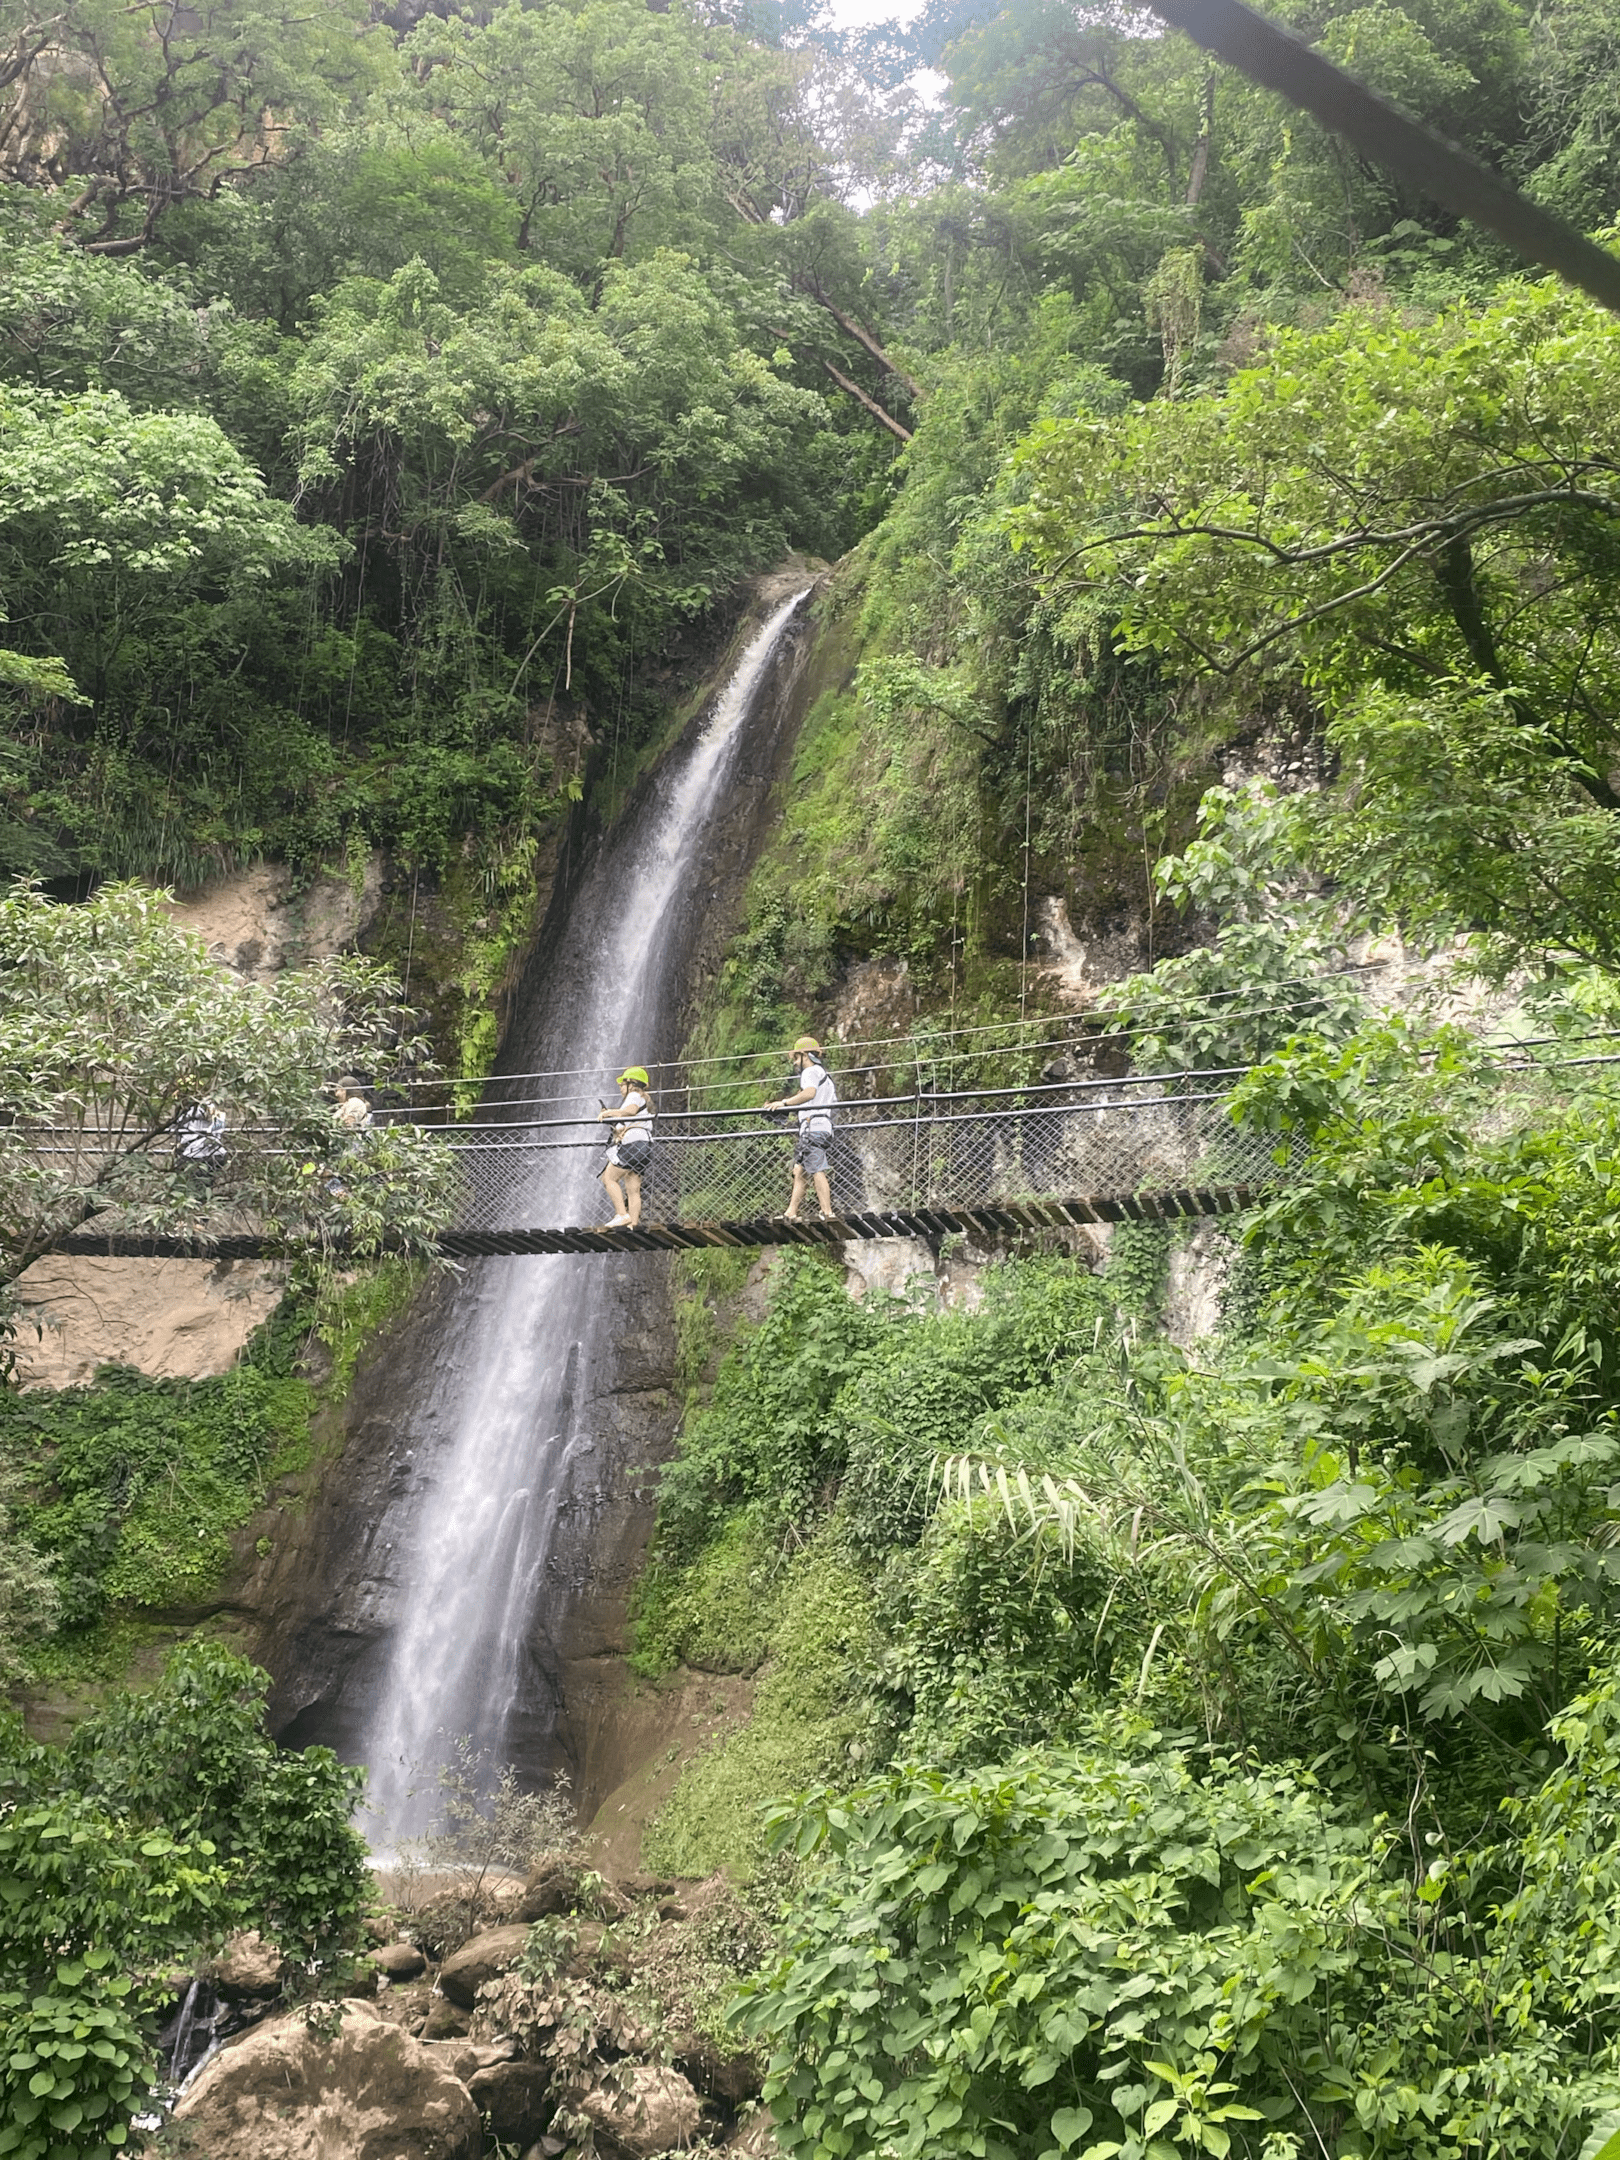 Walking across one of the suspension bridges in front of a waterfall is one of the most beautiful locations in Guatemala..